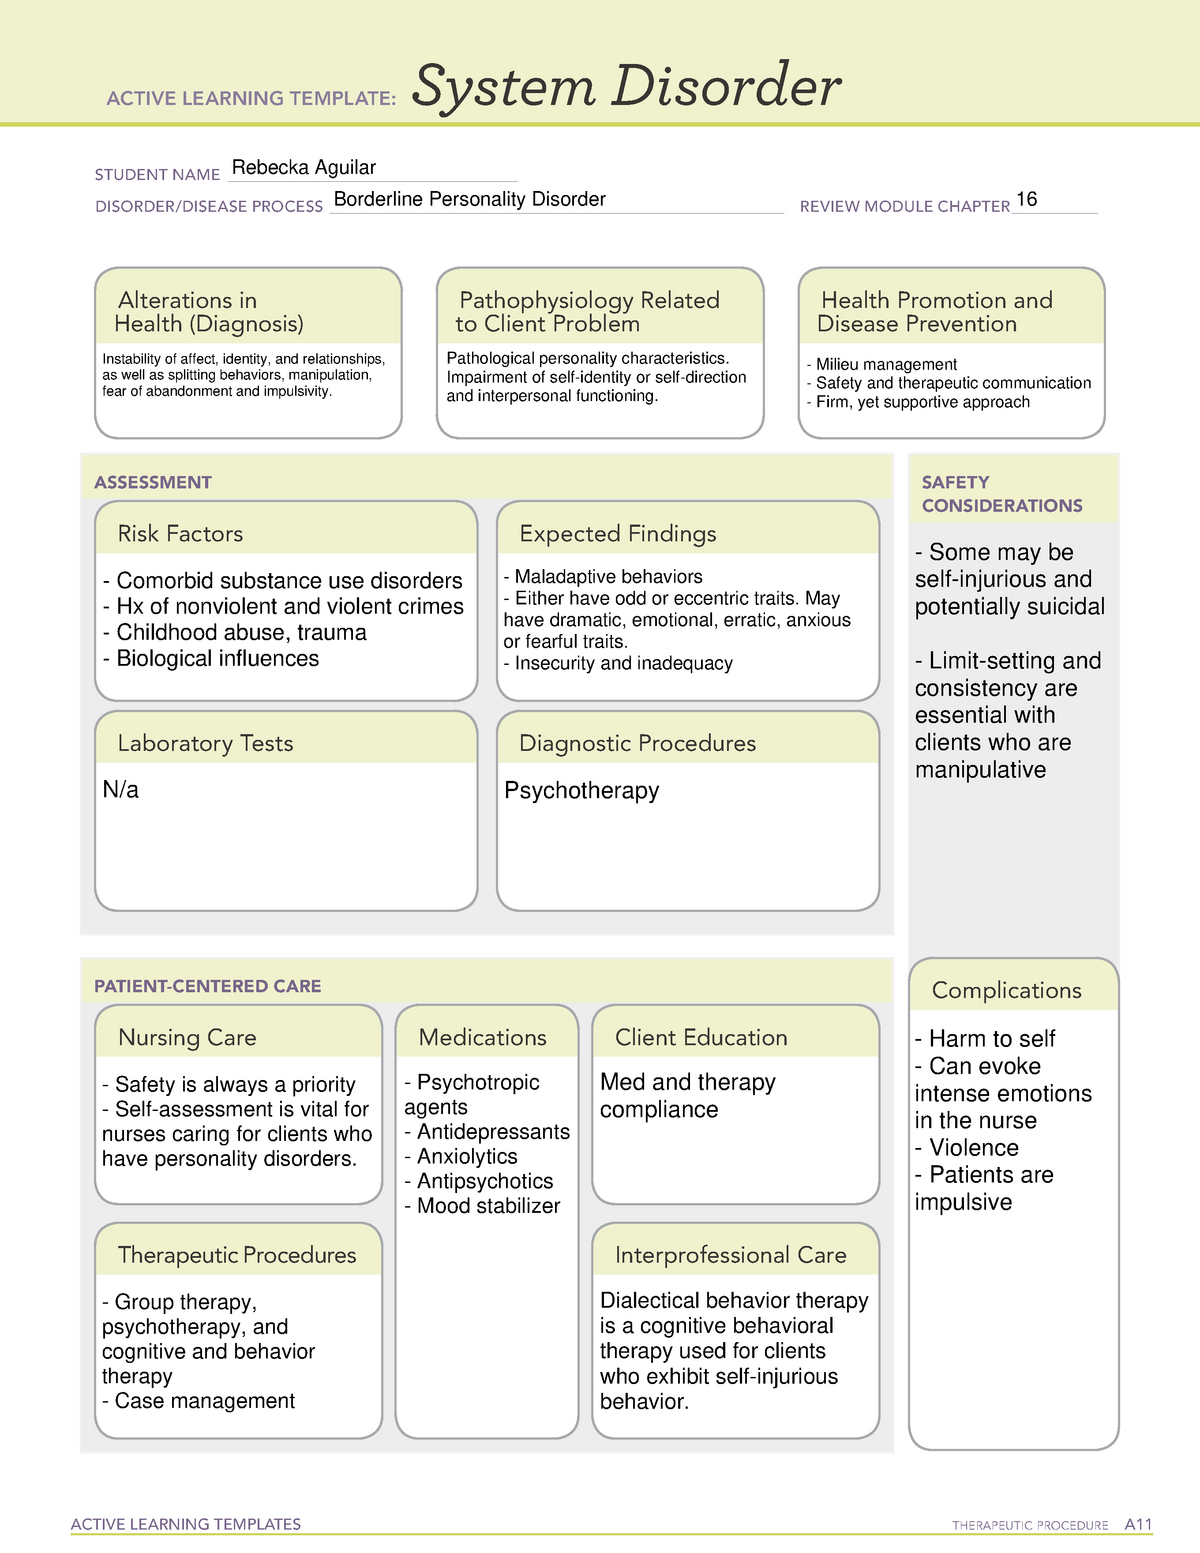 Ati ALT borderline Personality Disorders ACTIVE LEARNING TEMPLATES